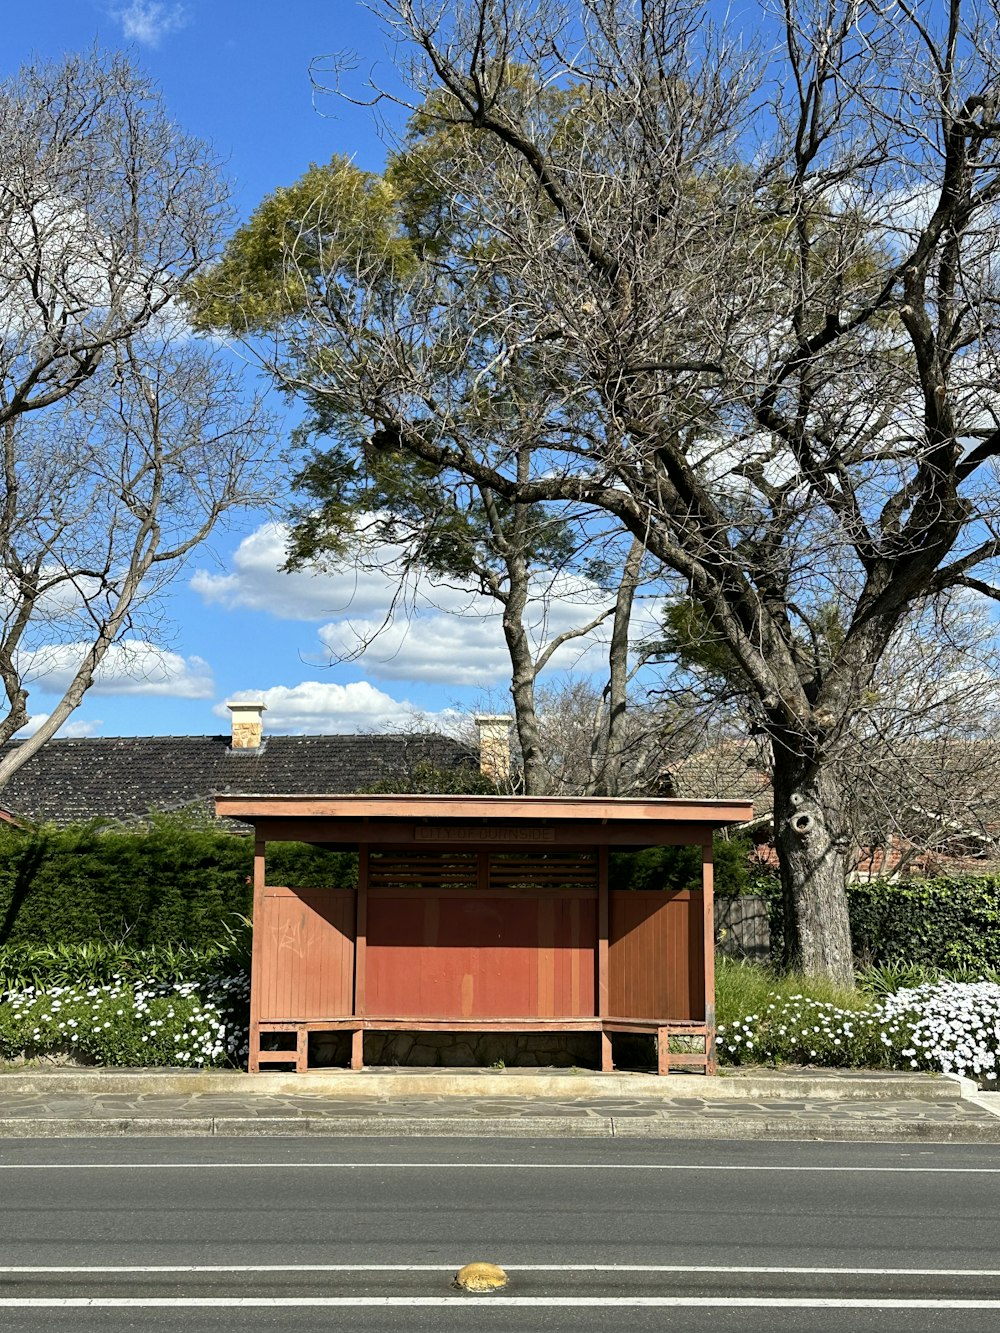 a small wooden structure sitting on the side of a road